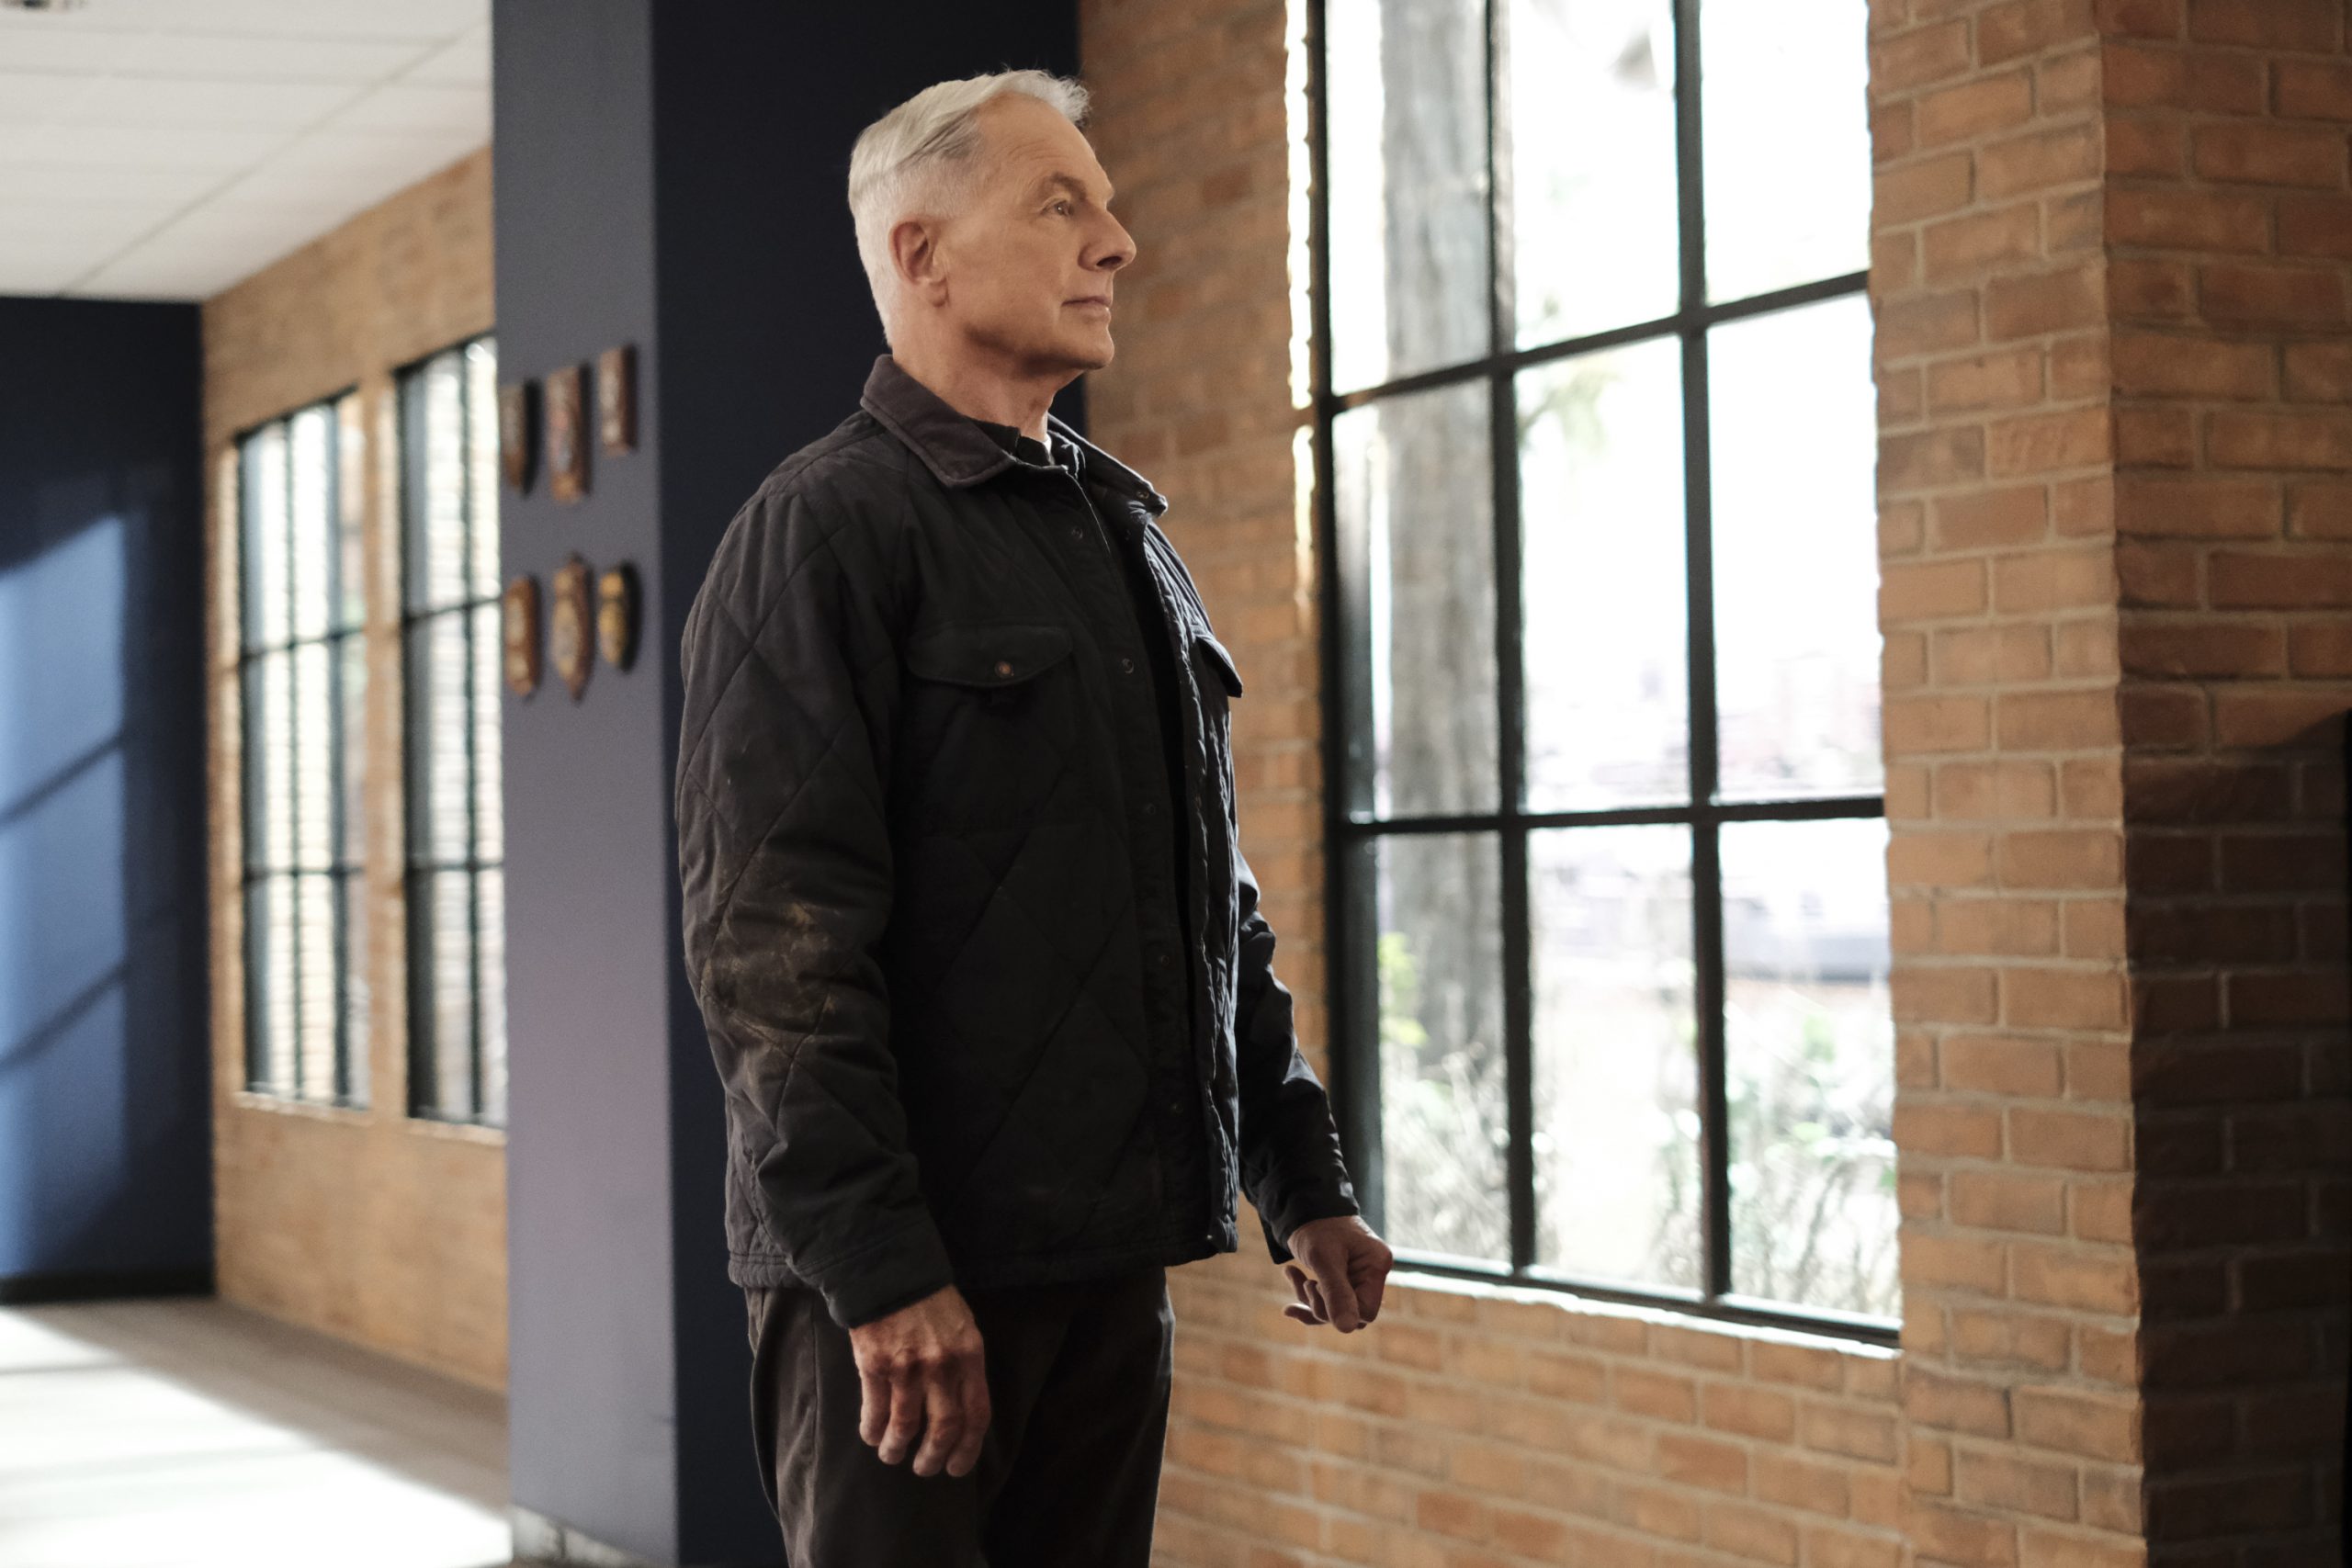 ‘NCIS’ Season 18 Finale News and an Explanation for the Dark Turn